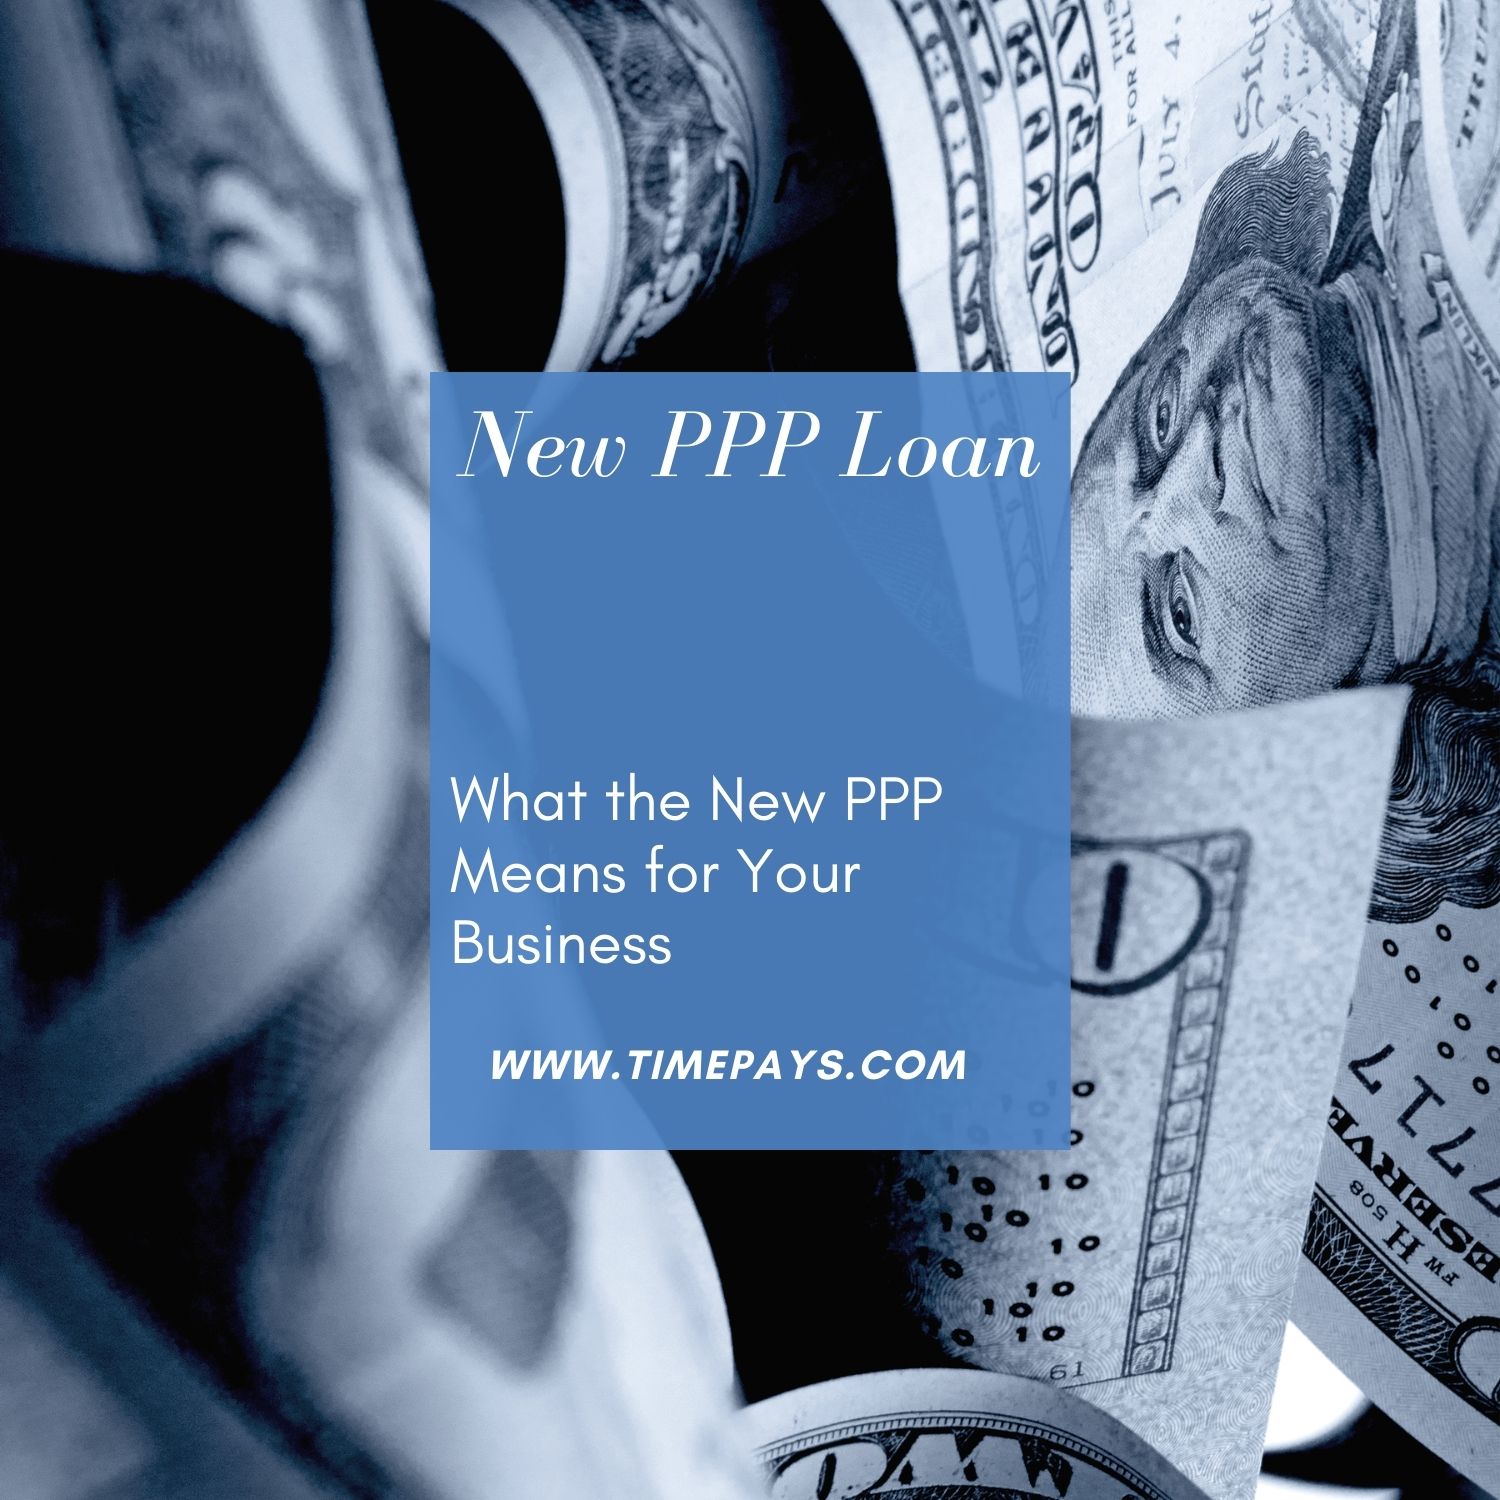 What the New PPP Means for Your Business